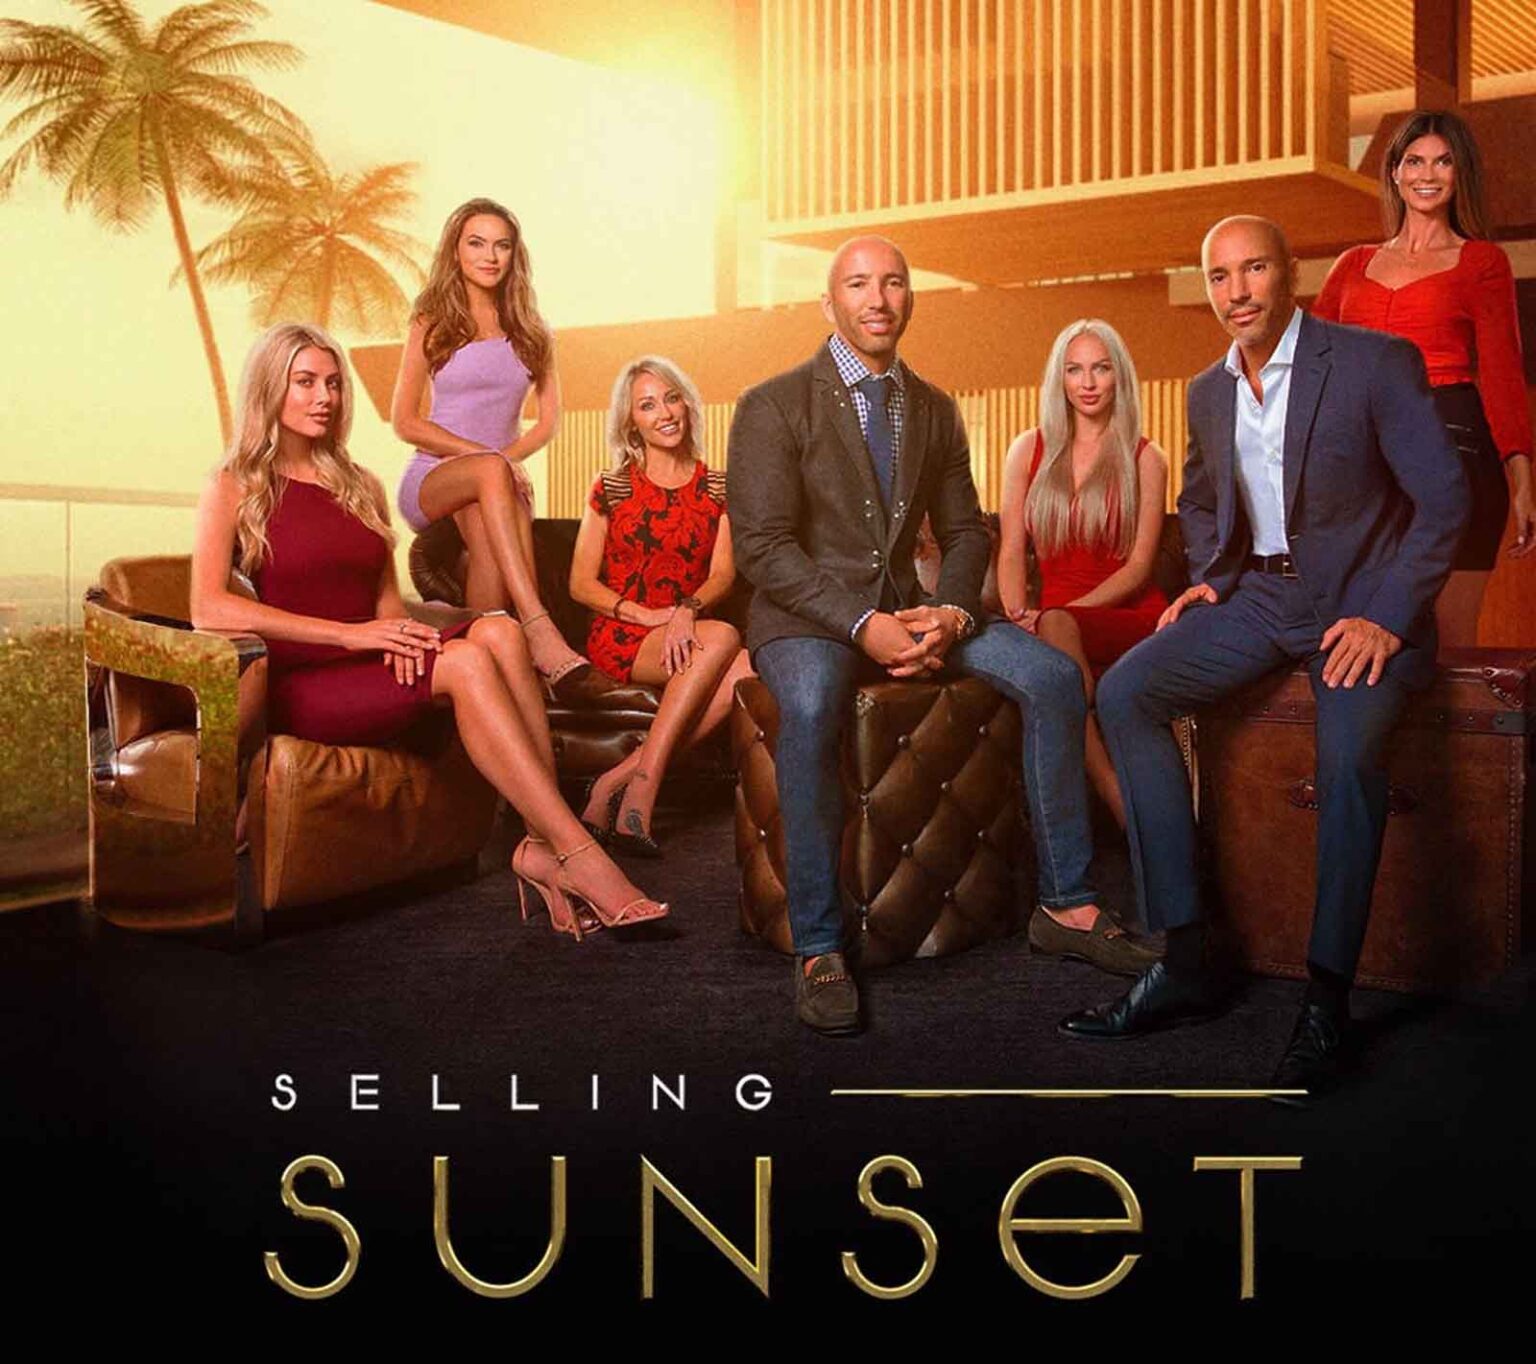 Chrissy Teigen accused the cast of 'Selling Sunset' of merely pretending to be realtors. The cast then hit back at her on Twitter and in interviews.